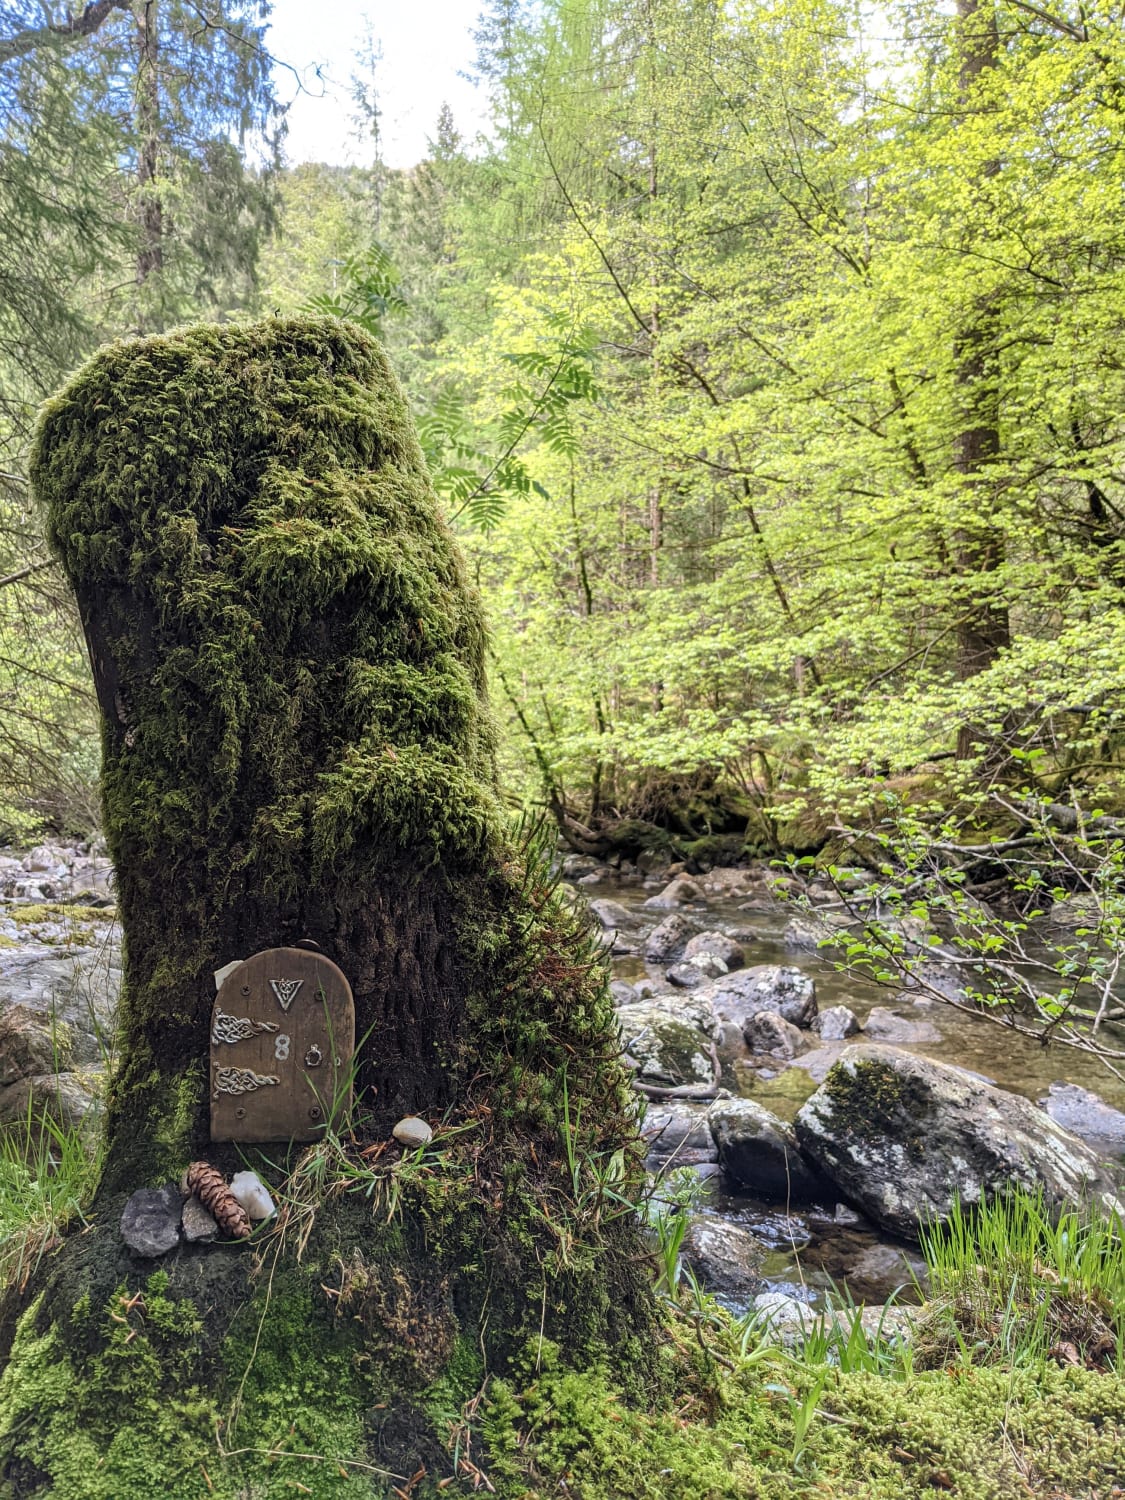 Found a little "street" of fairy houses out in the forest of Argyll, Scotland.